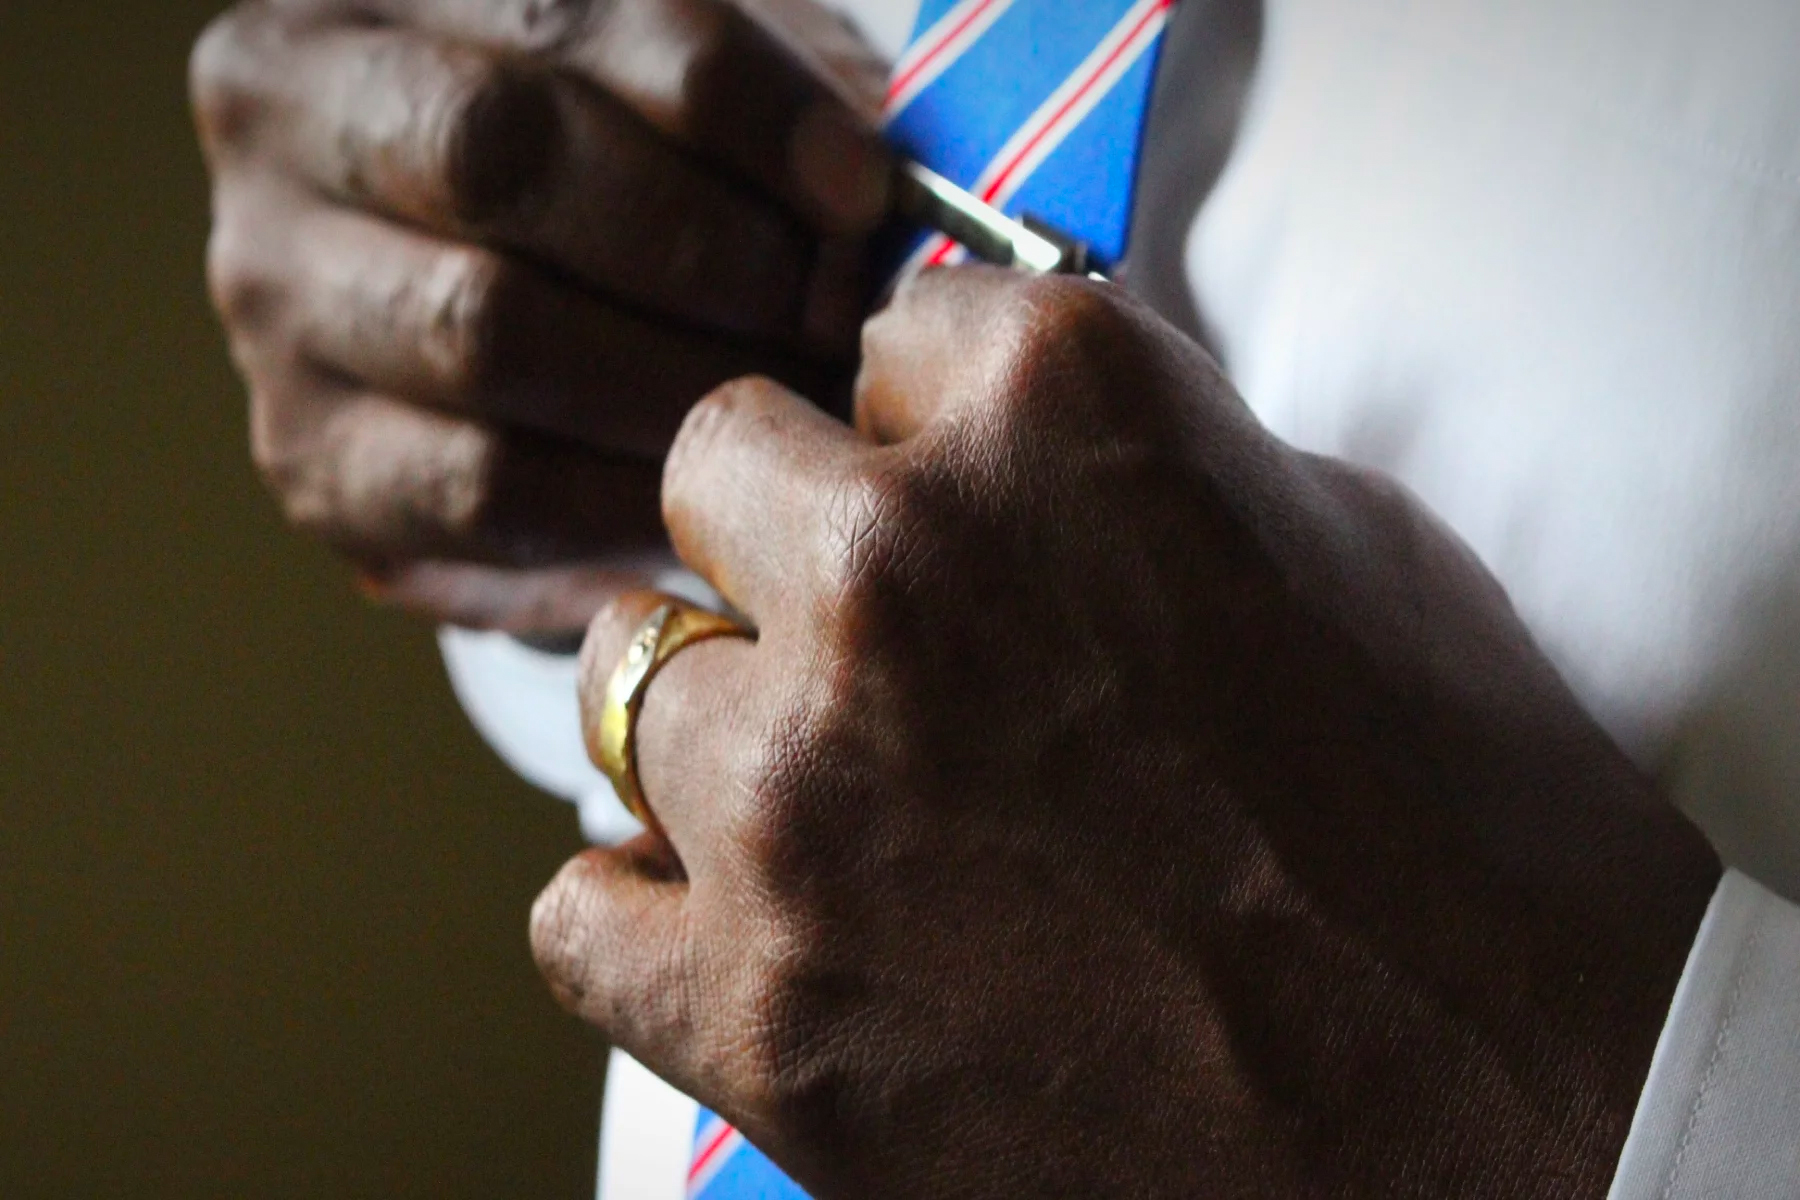 Close up of man's hands with wedding band adjusting a tie pin